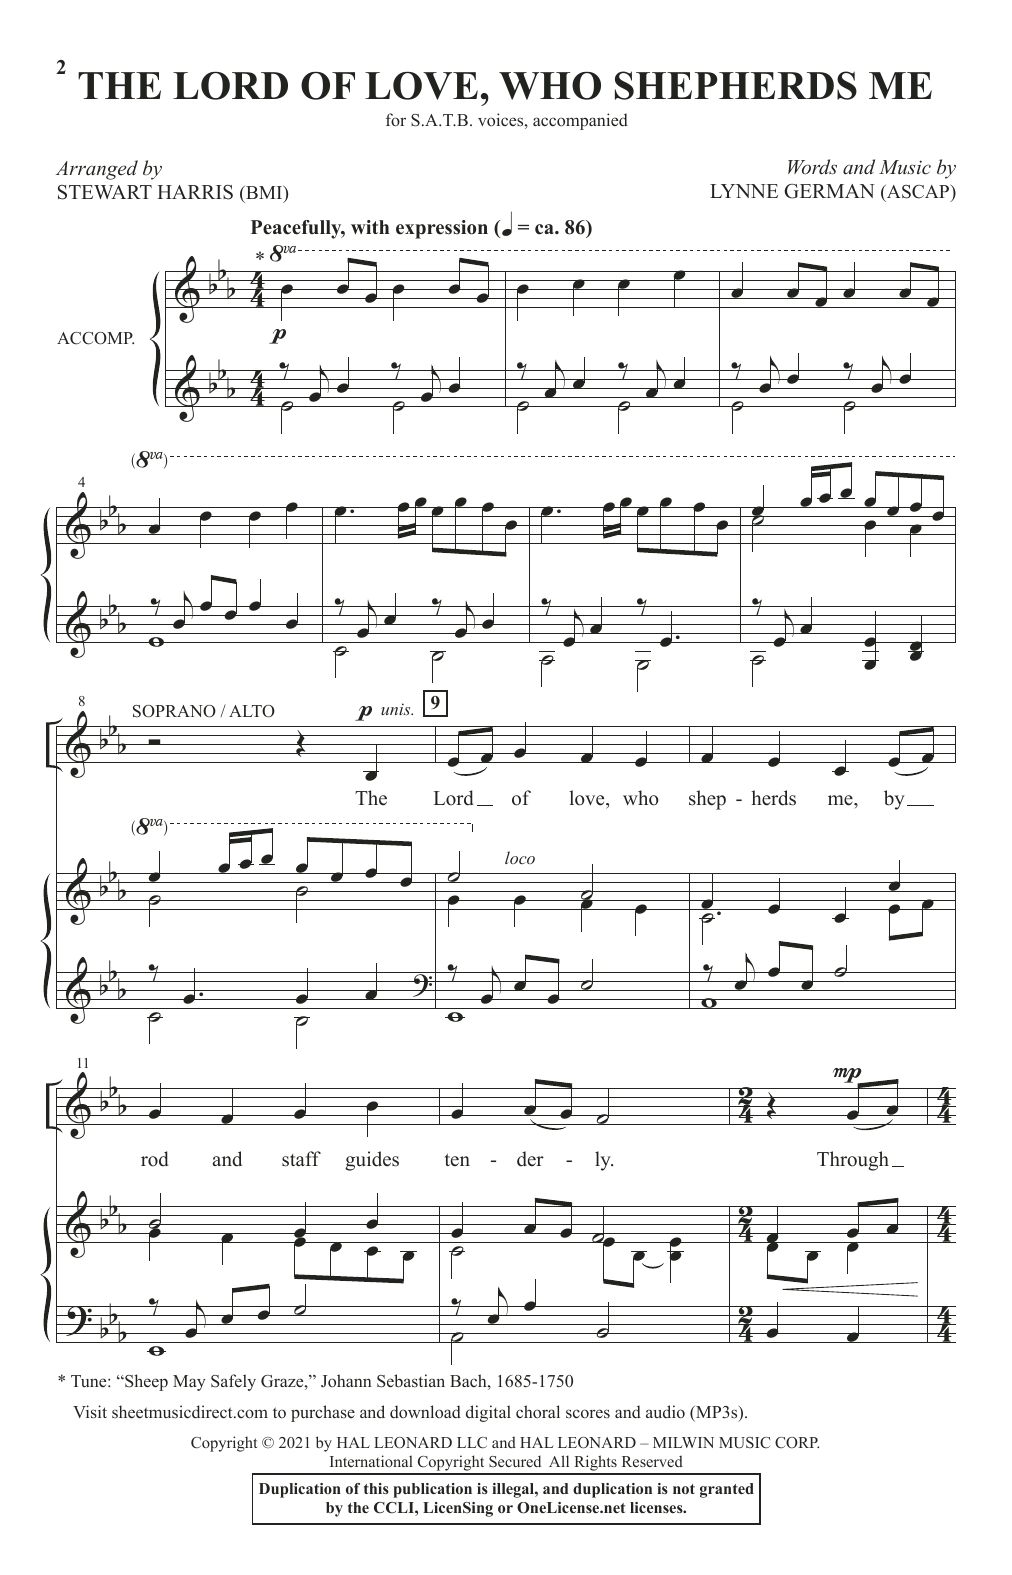 Download Lynne German The Lord Of Love, Who Shepherds Me (arr Sheet Music